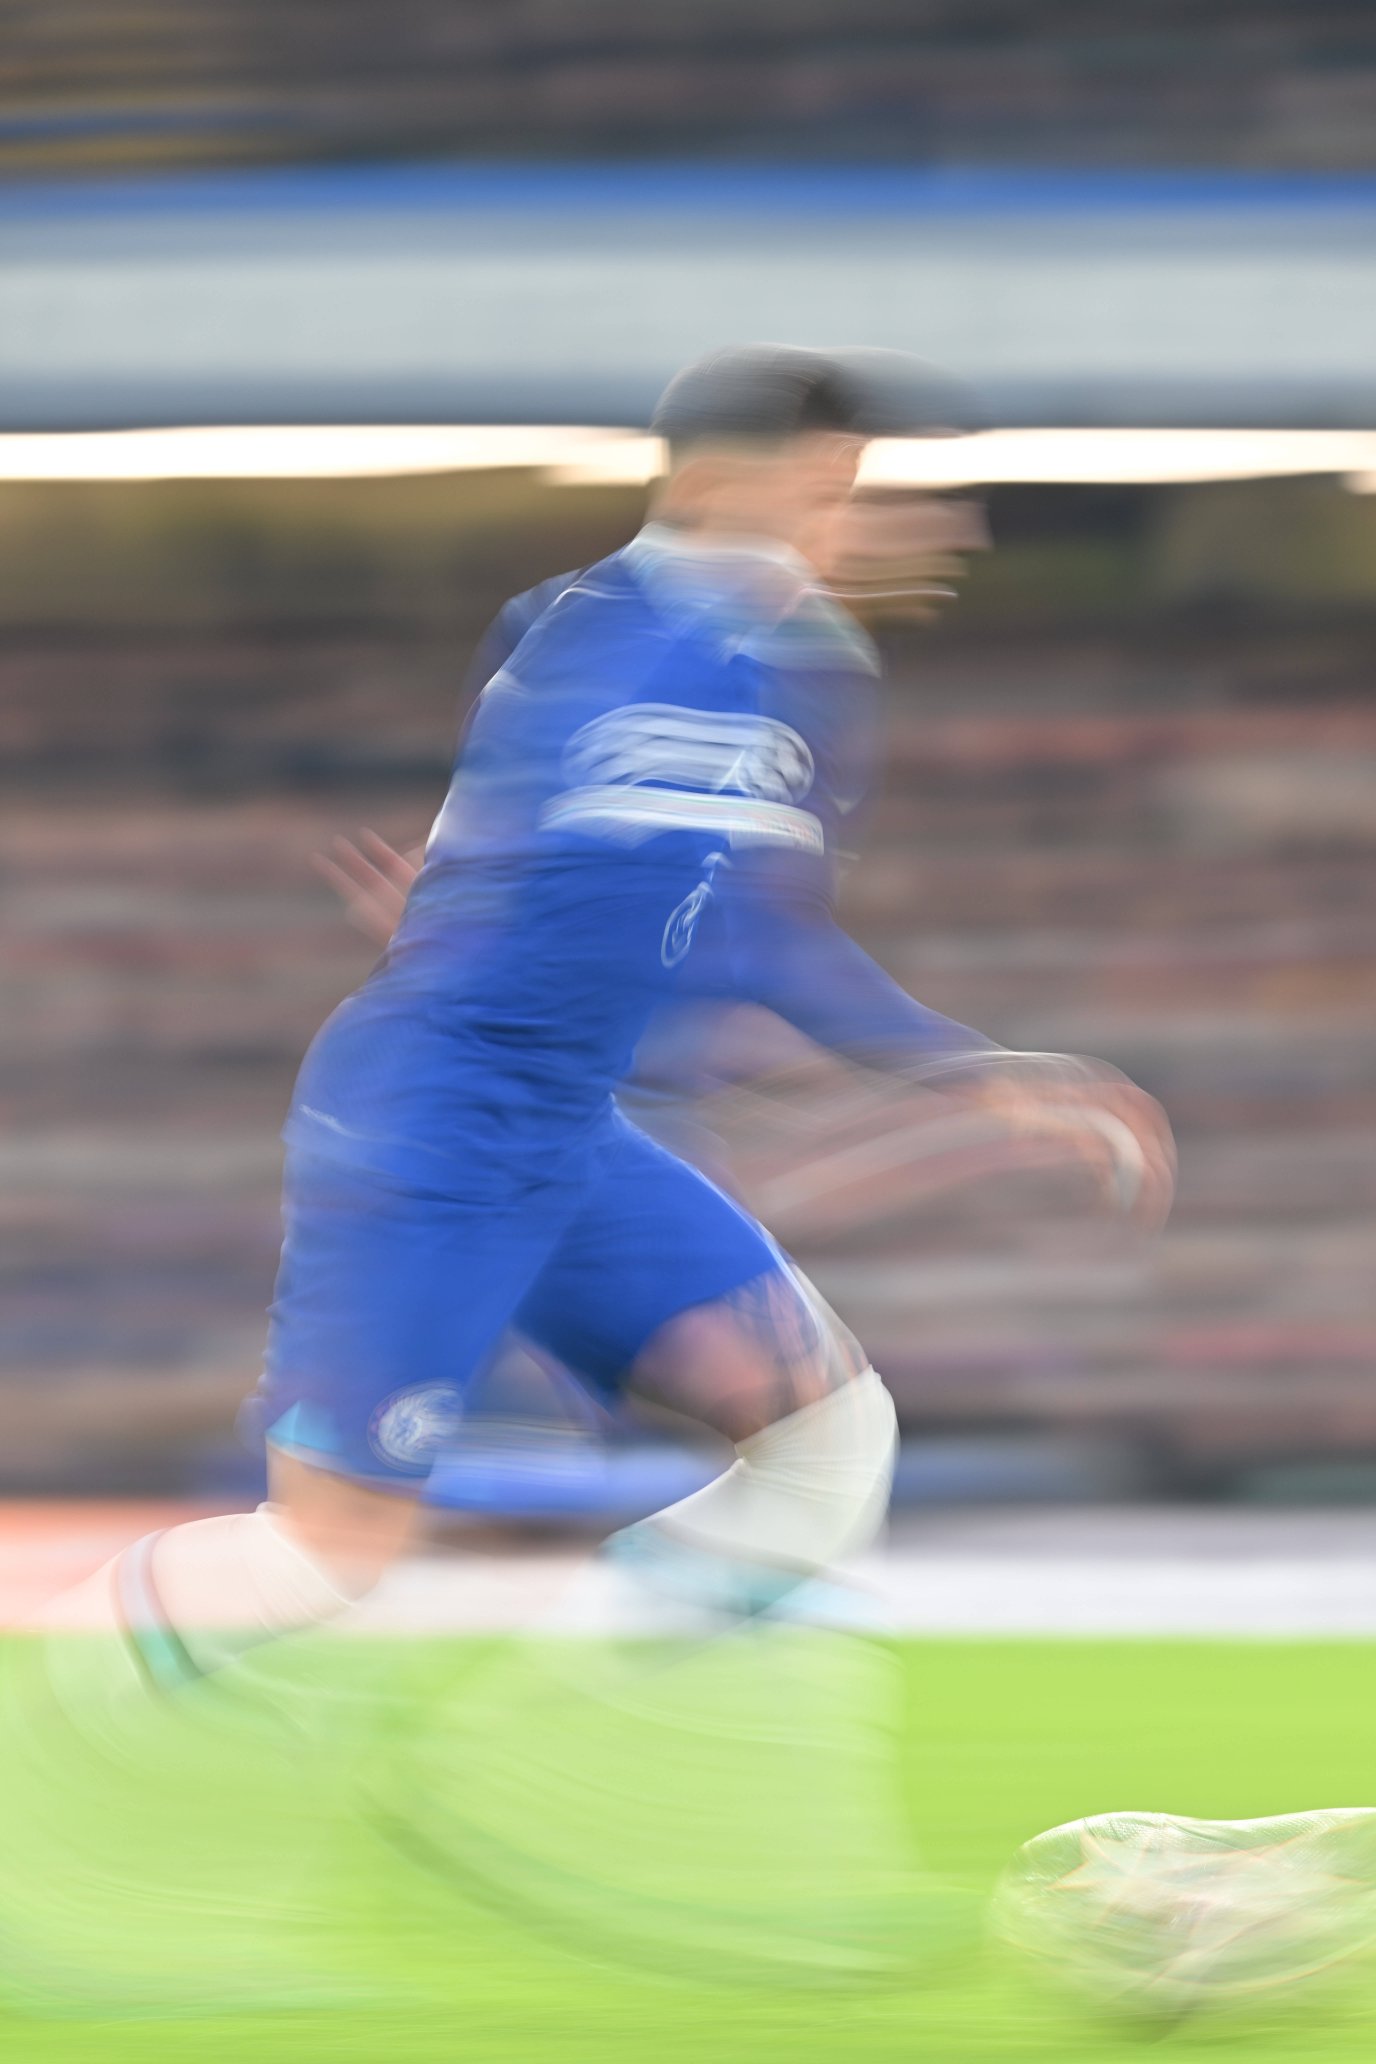 Can you guess the player⁉️👀 #PulseSportsNigeria